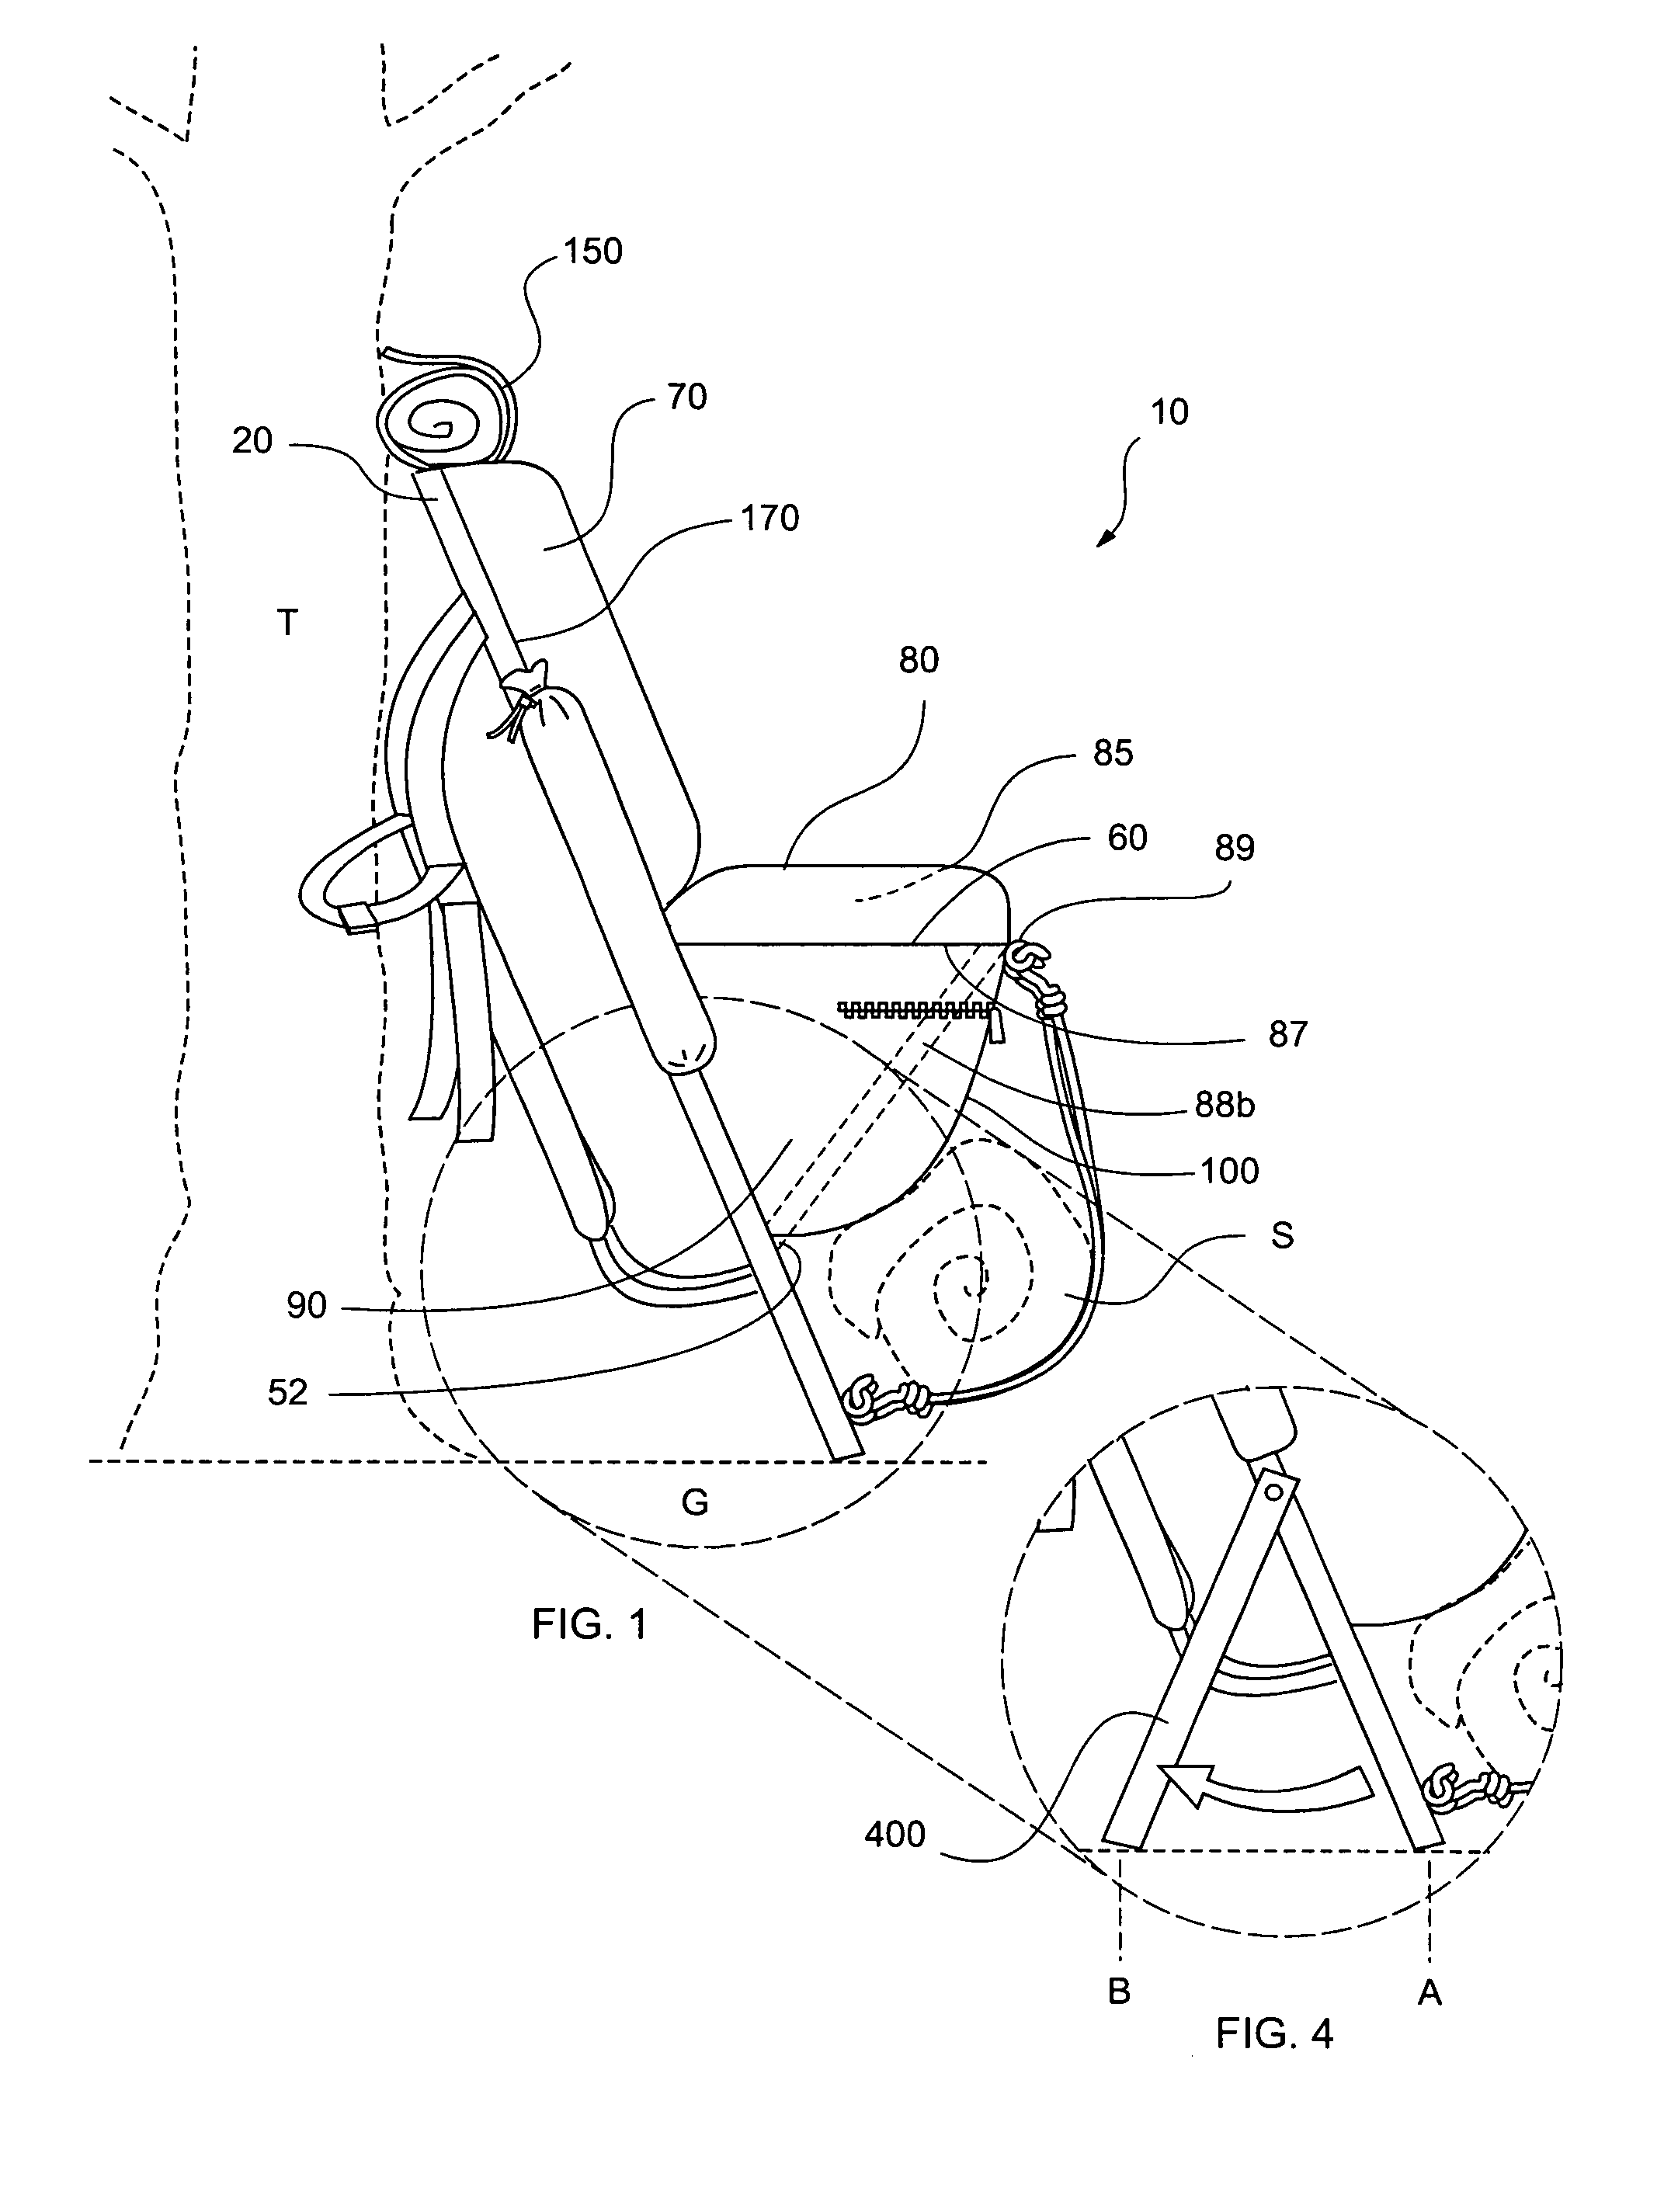 Hunting pack stool and method of use thereof